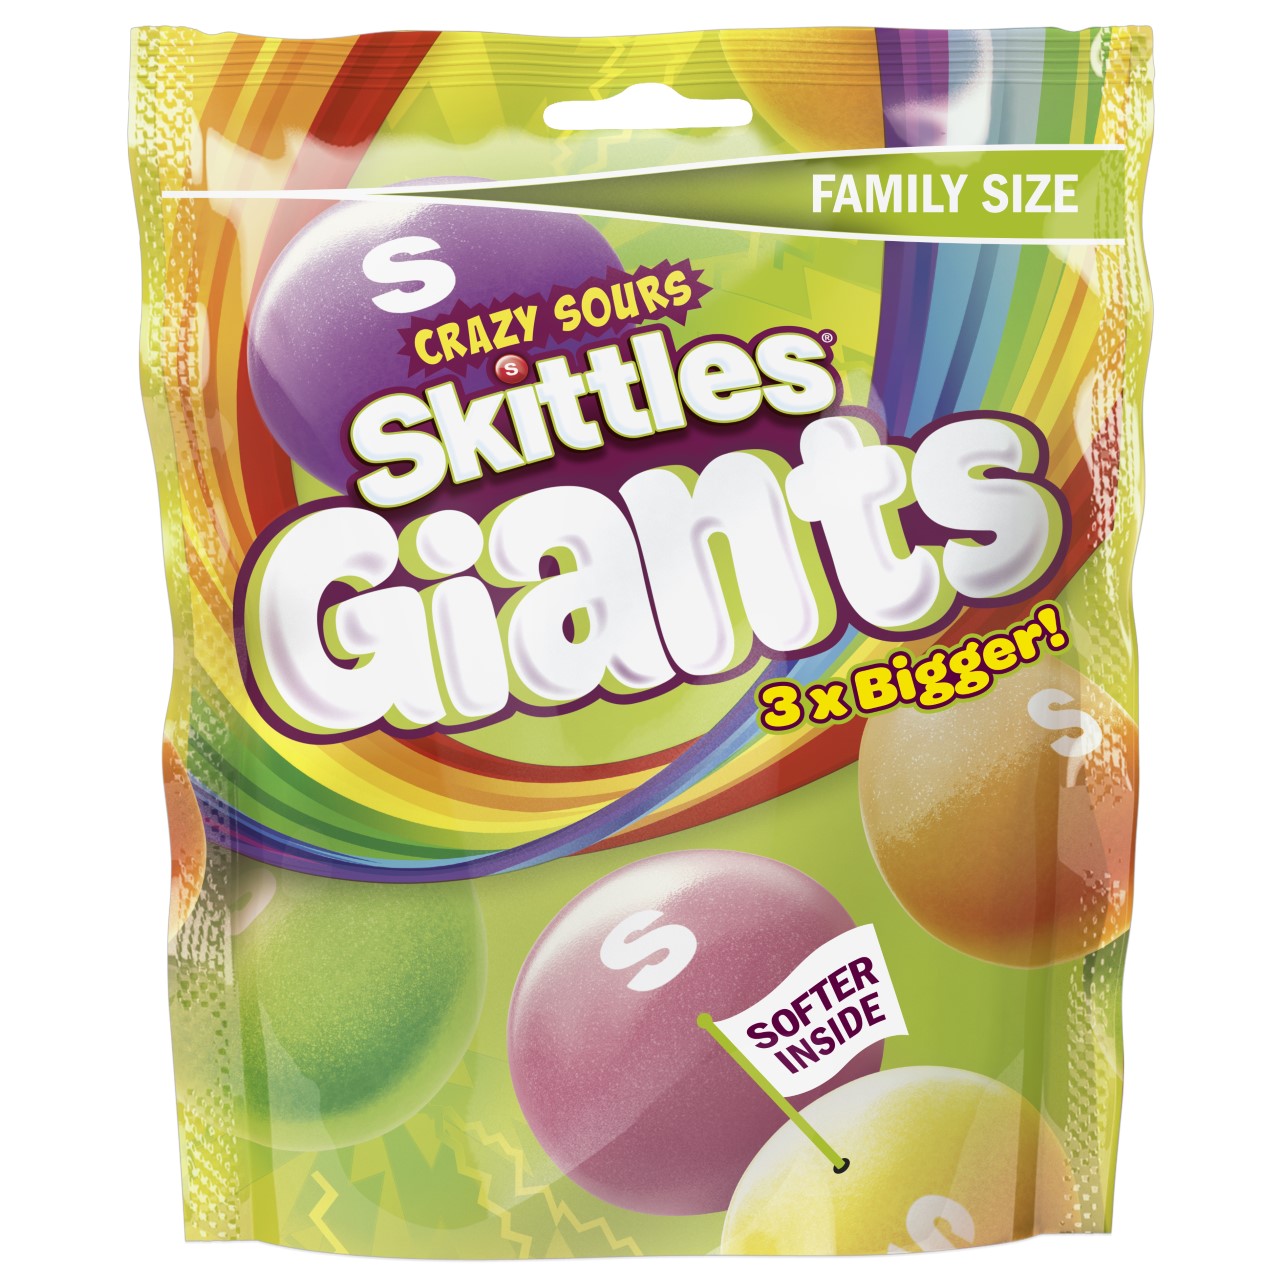 Skittles Giants Crazy Sours to launch this summer